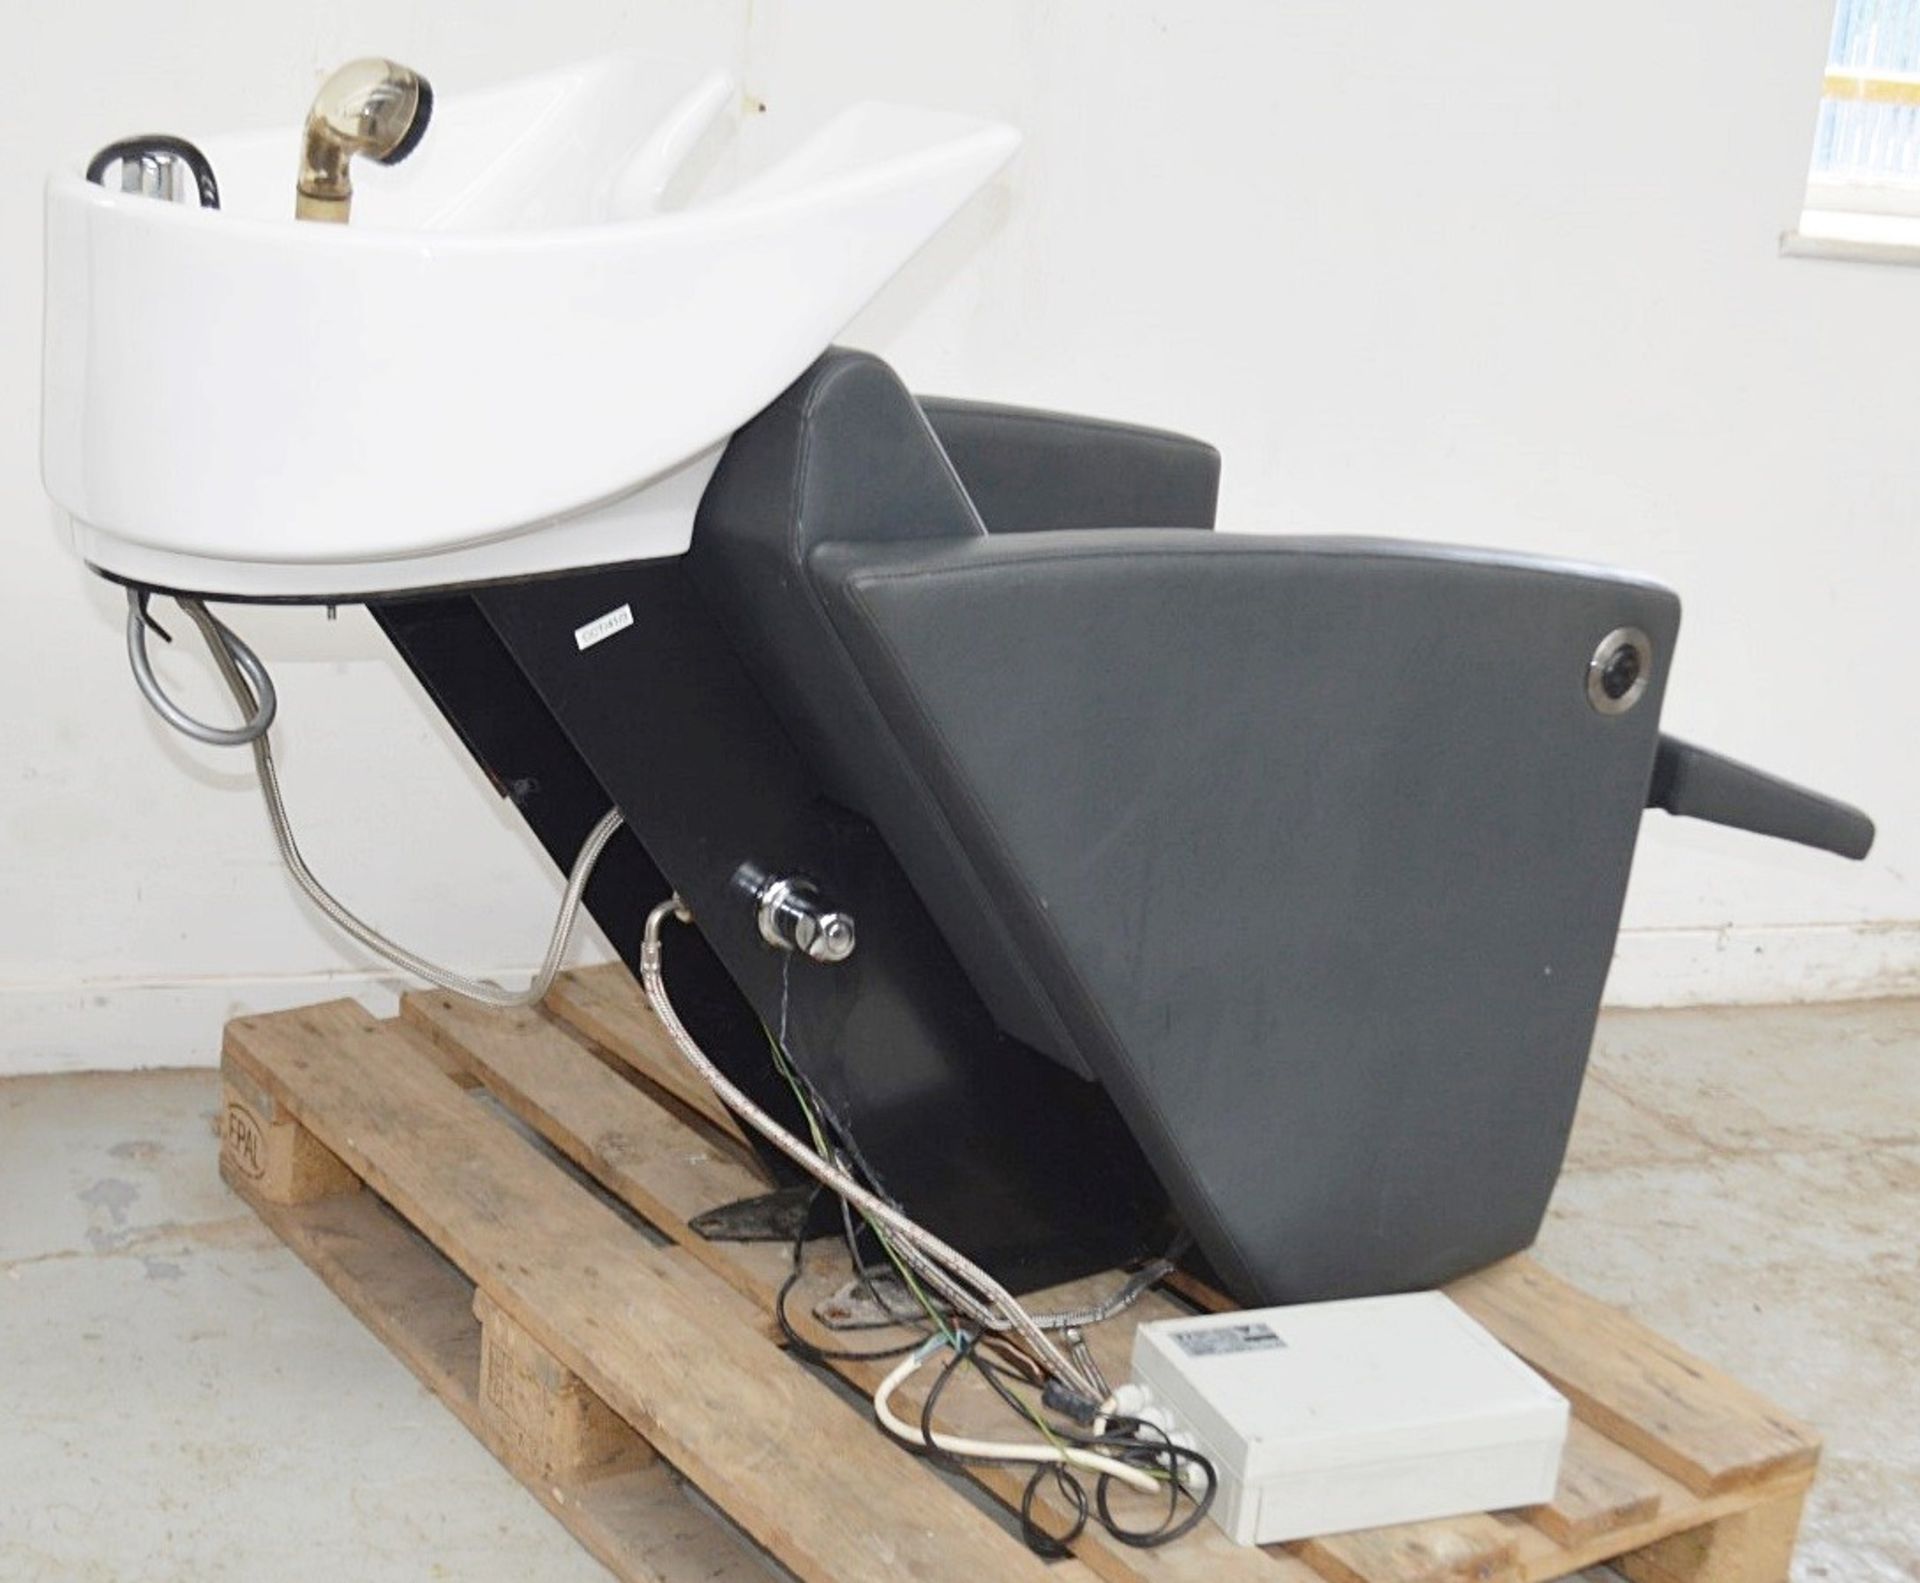 1 x Professional Reclining Hair Washing Chair With Basin Shower And Foot Rest - Image 15 of 19